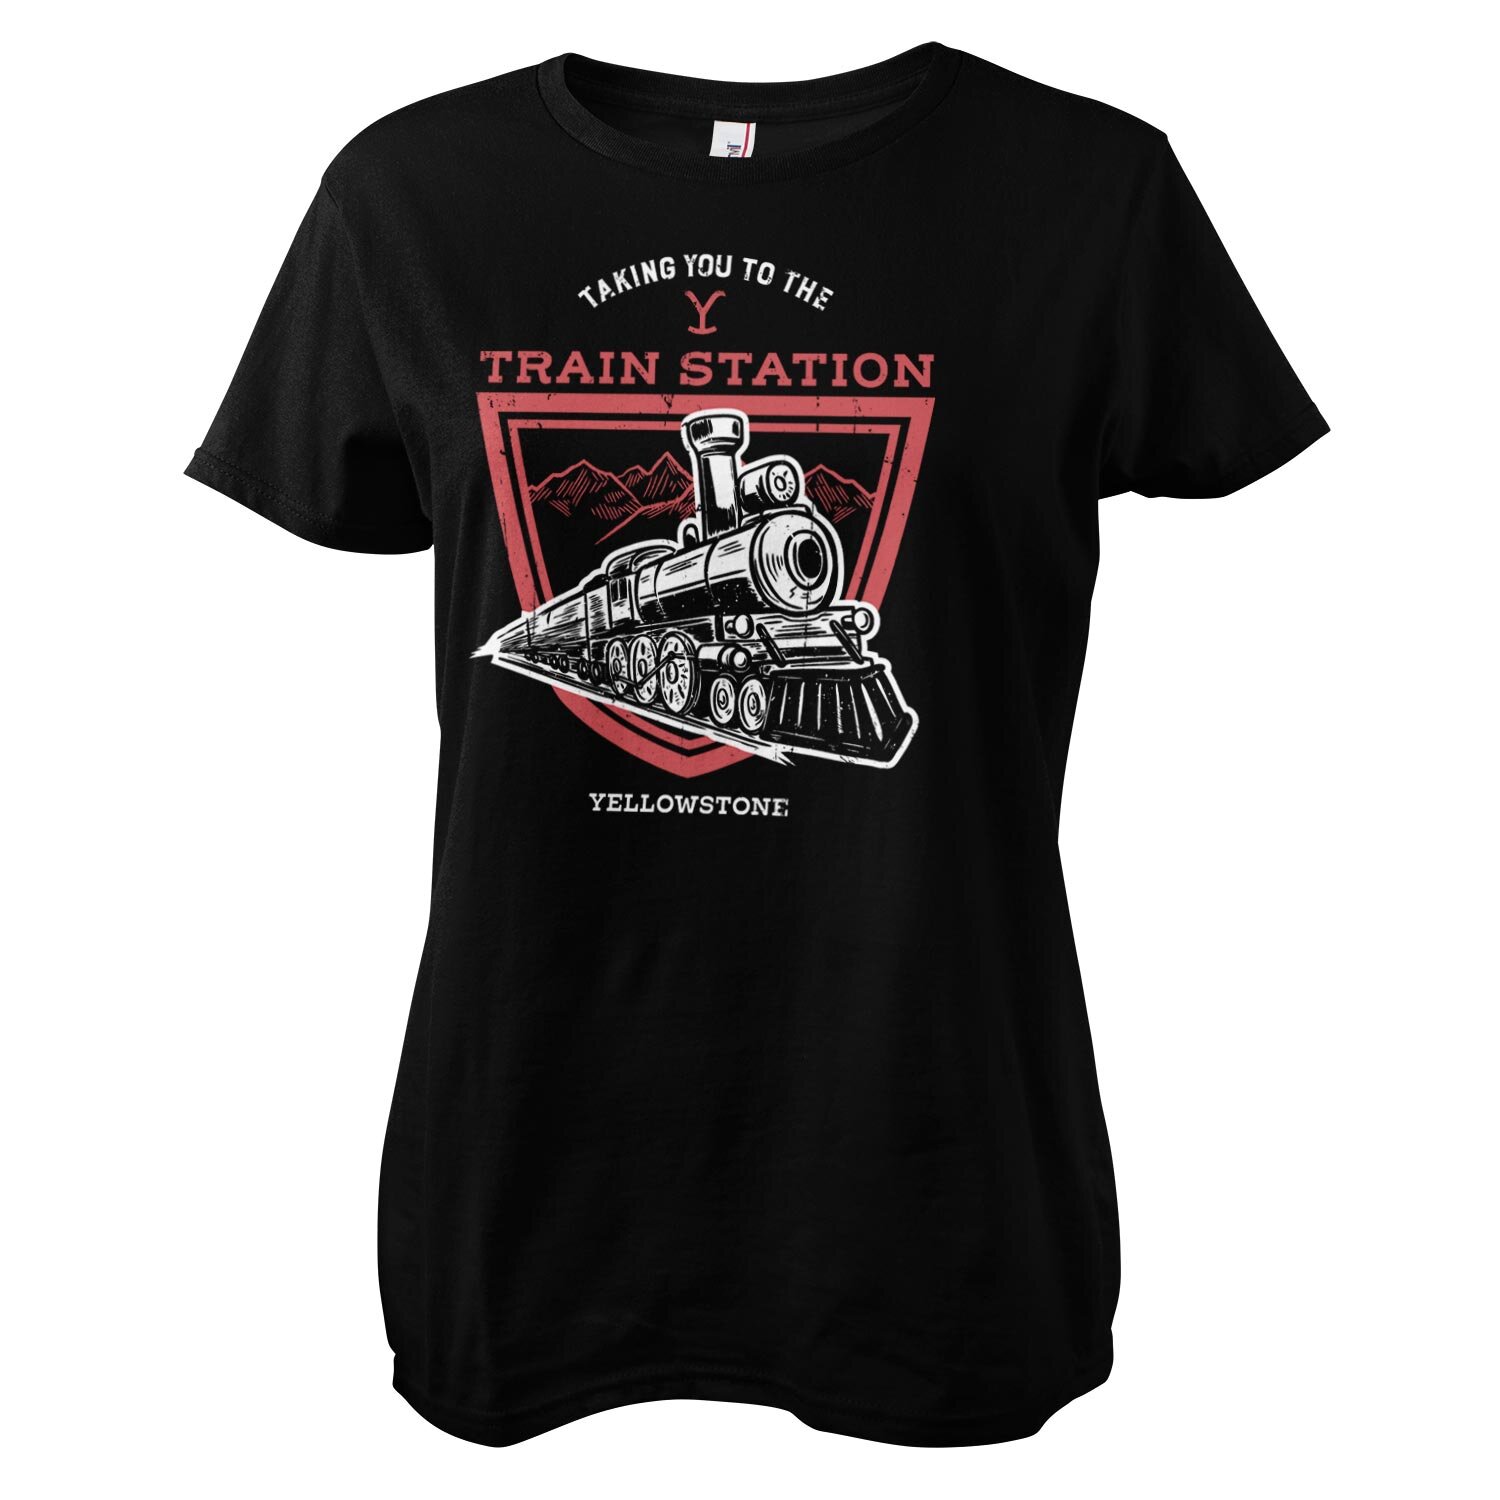 Taking You To The Train Station Girly Tee